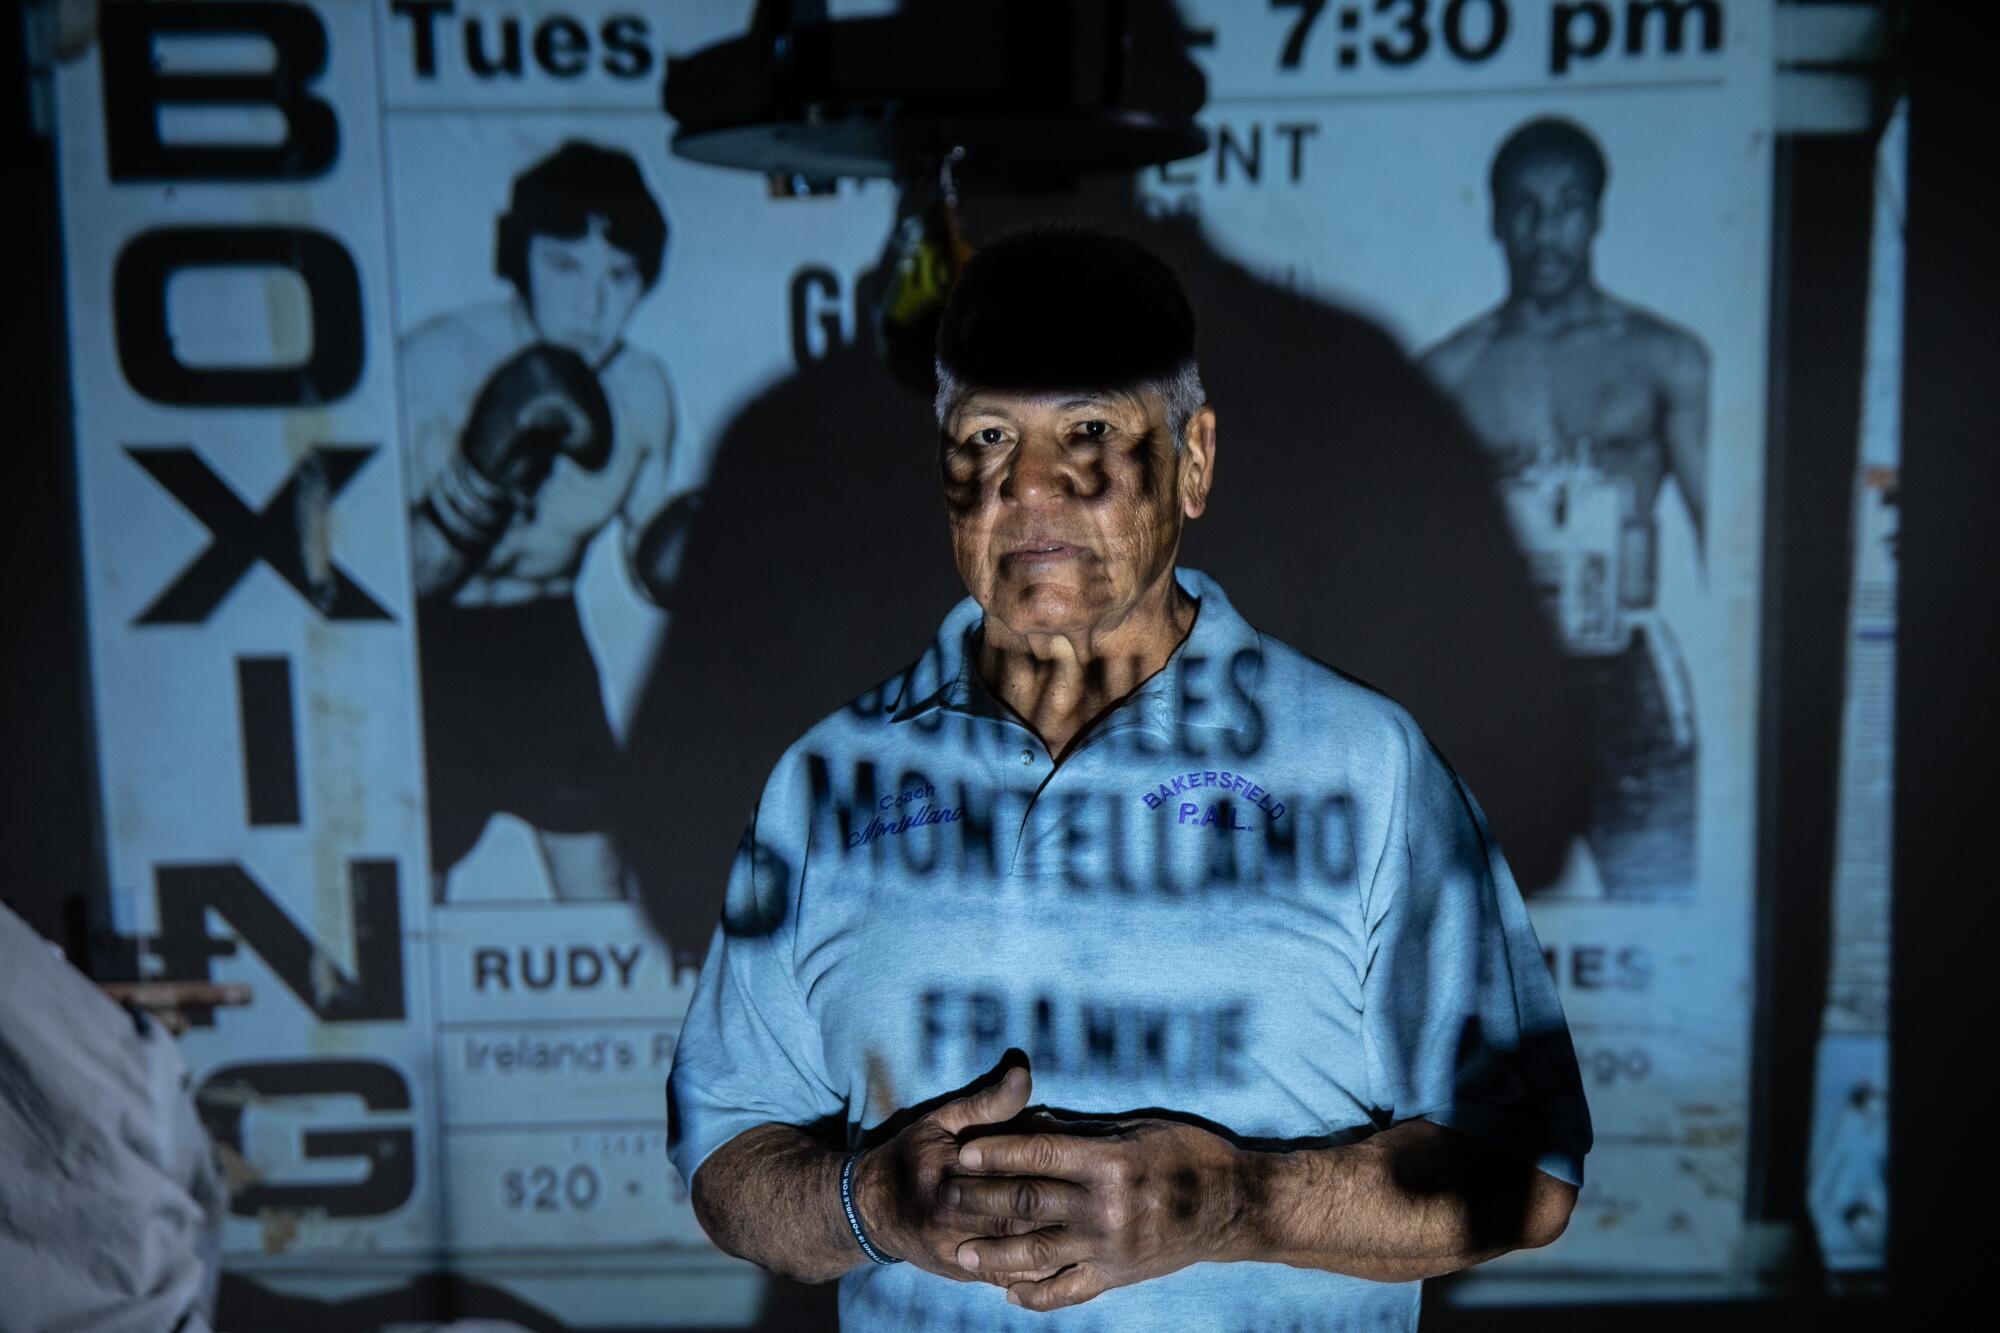 Gonzalo Montellano, a retired lightweight boxer, is shown silhouetted in front of a boxing poster. 